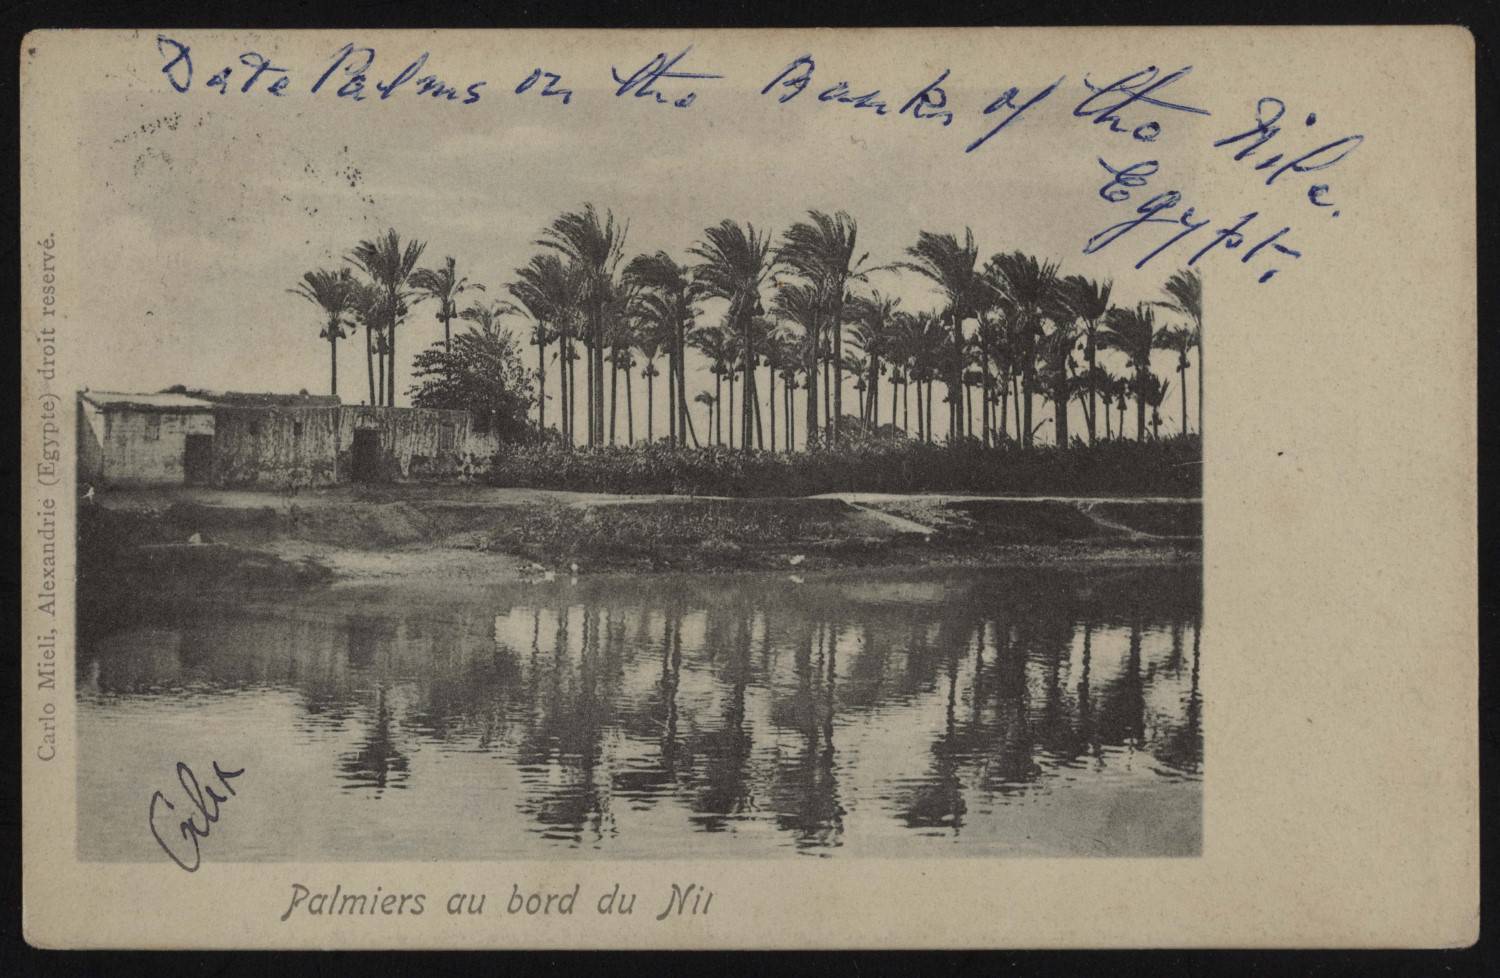 <p>Postcard of date palms on the edge of the Nile, Egypt</p>